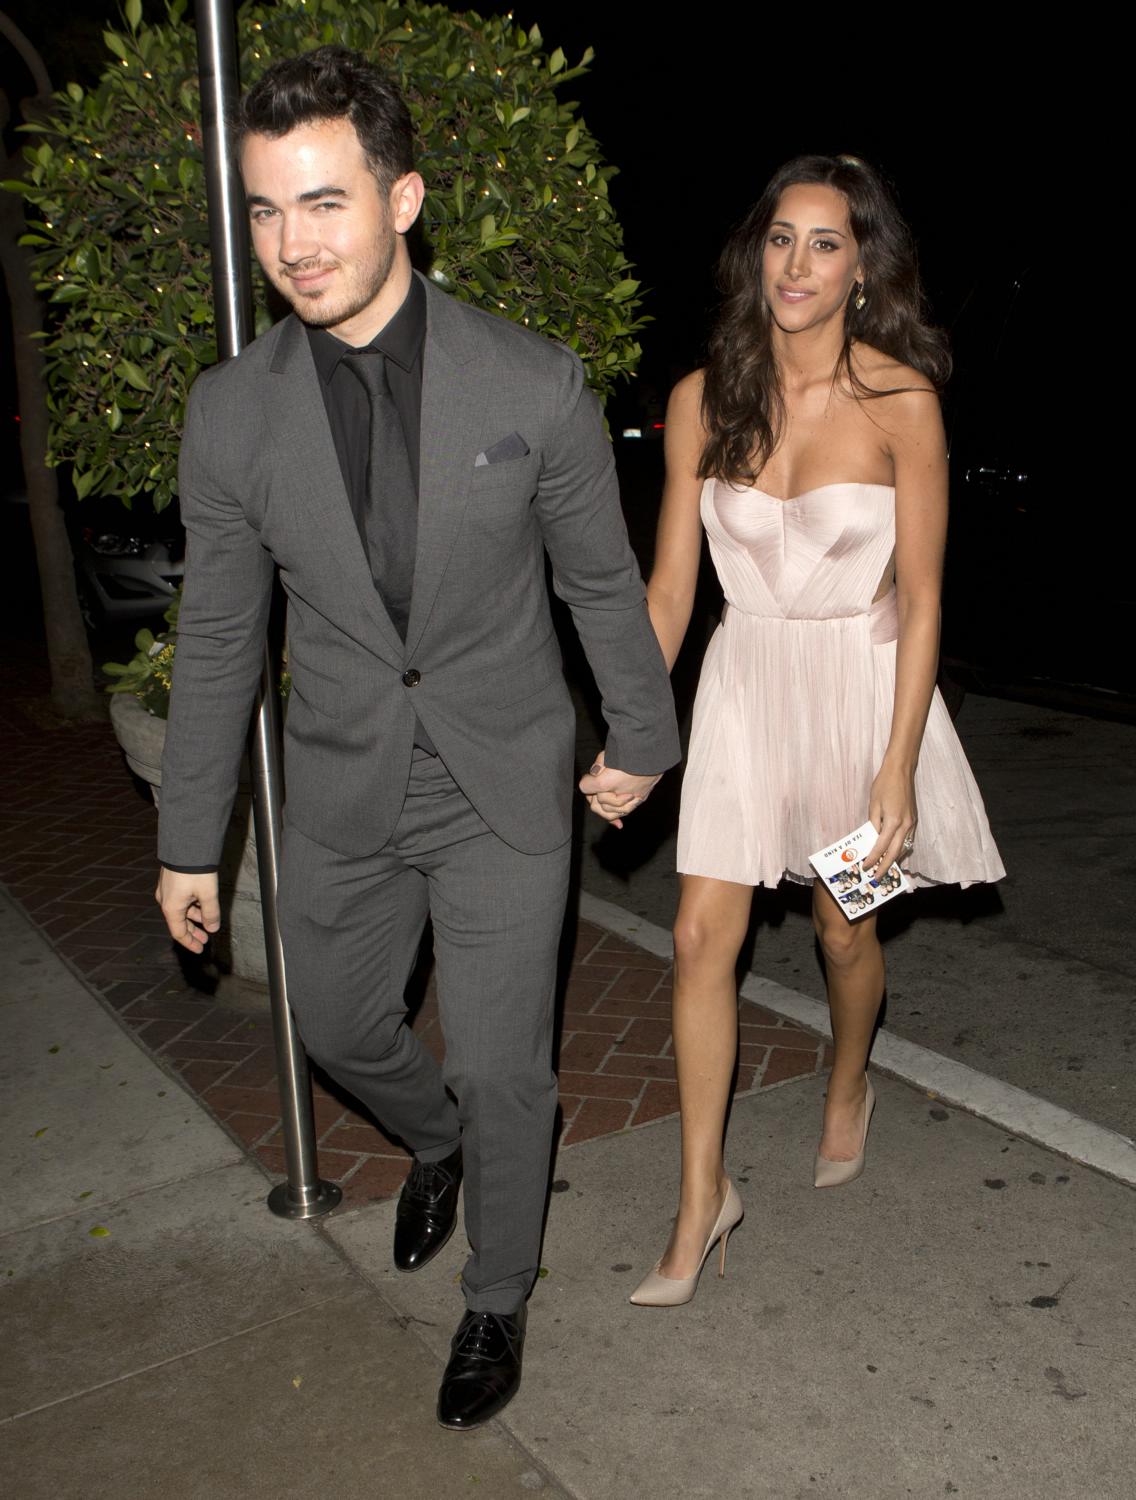 Kevin Jonas and his wife at Sunset Marquis Hotel – Celeb Donut